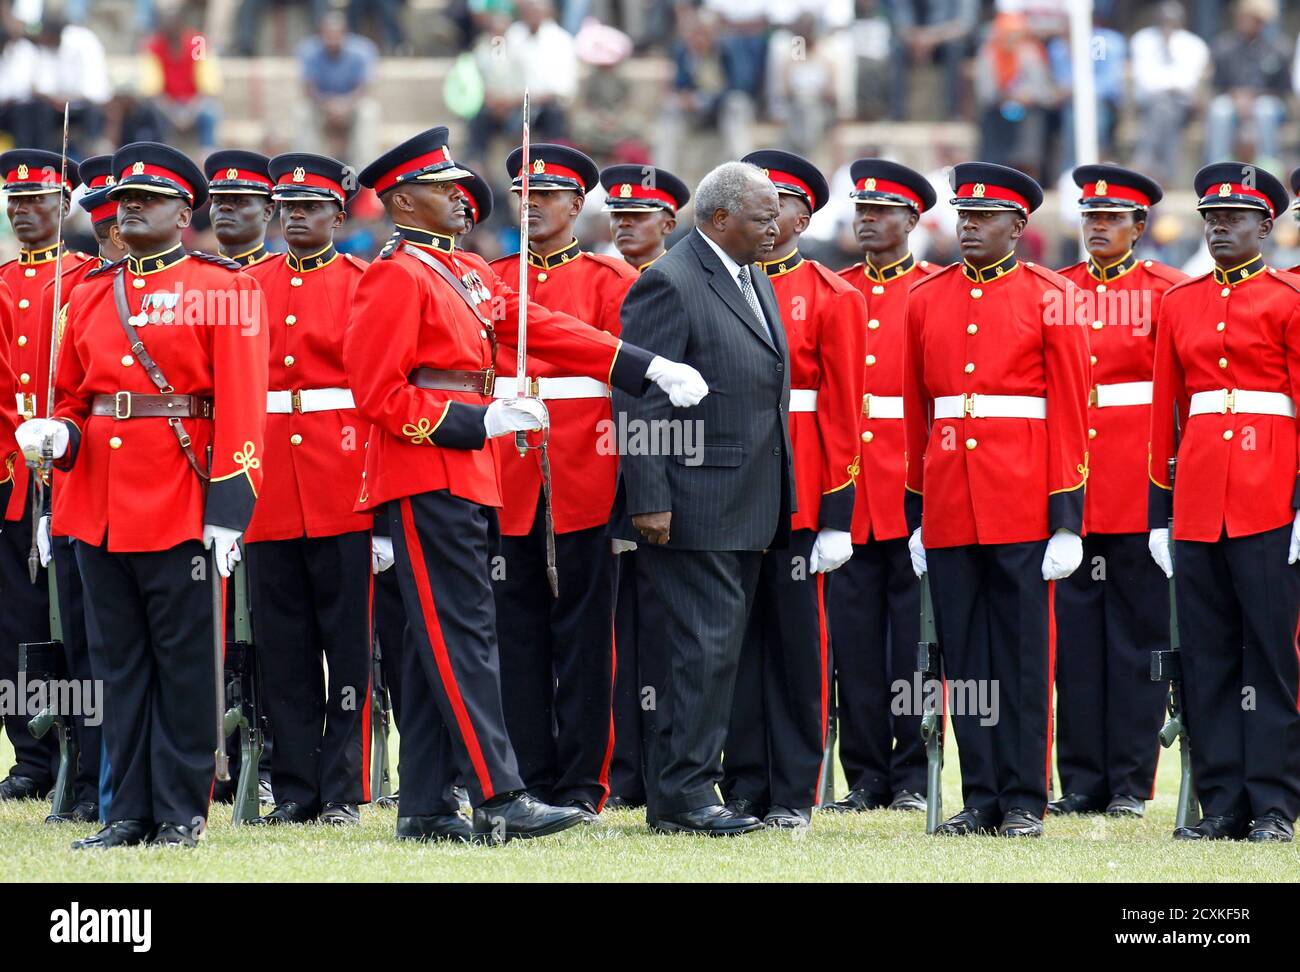 Kenyan's President Mwai Kibaki inspects a guard of honour during Kenya's Mashujaa Day (Hero's Day) celebrations at the Nyayo National Stadium in Nairobi October 20, 2012. The national holiday commemorates those who had taken part in the country's struggle for liberation. REUTERS/Thomas Mukoya (KENYA - Tags: SOCIETY ANNIVERSARY POLITICS MILITARY TPX IMAGES OF THE DAY) Stock Photo